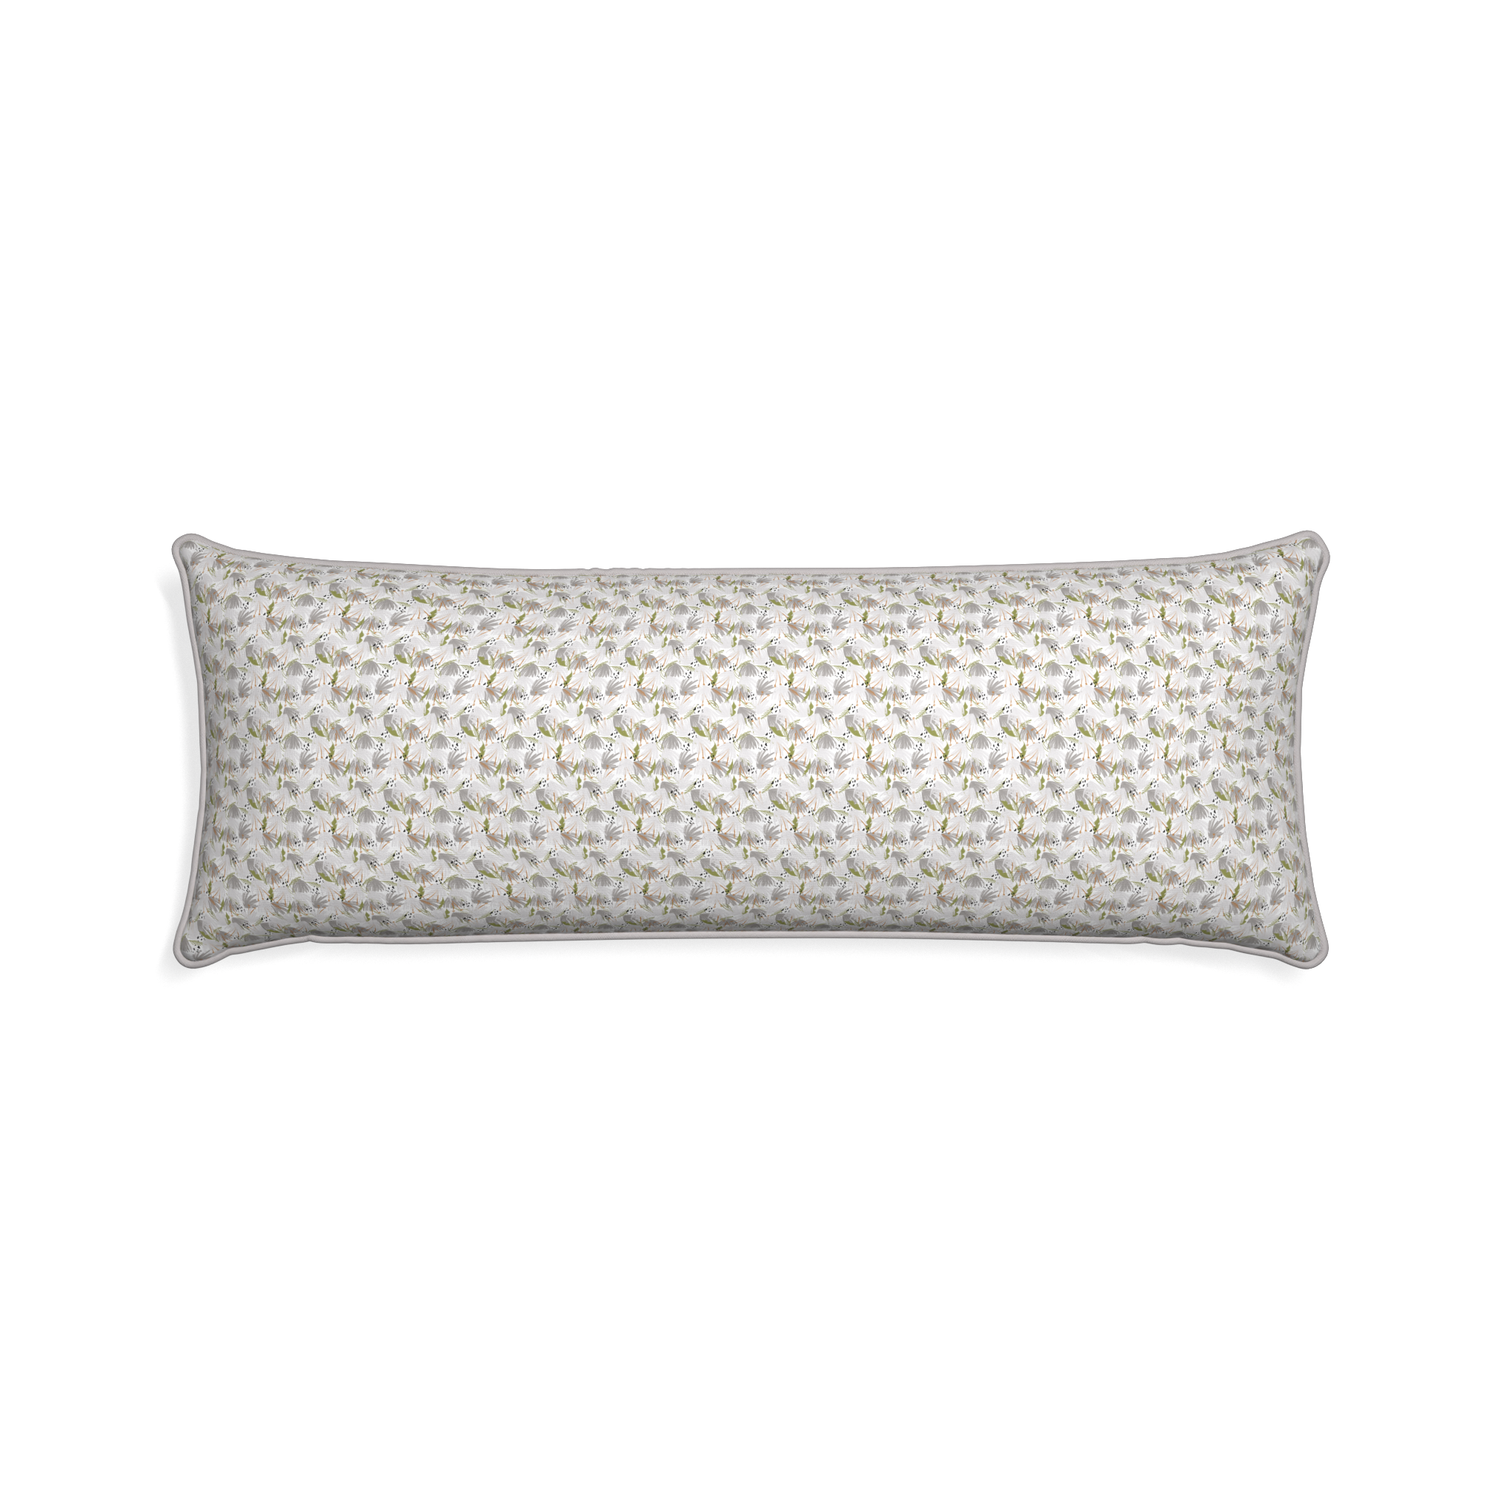 Xl-lumbar eden grey custom pillow with pebble piping on white background